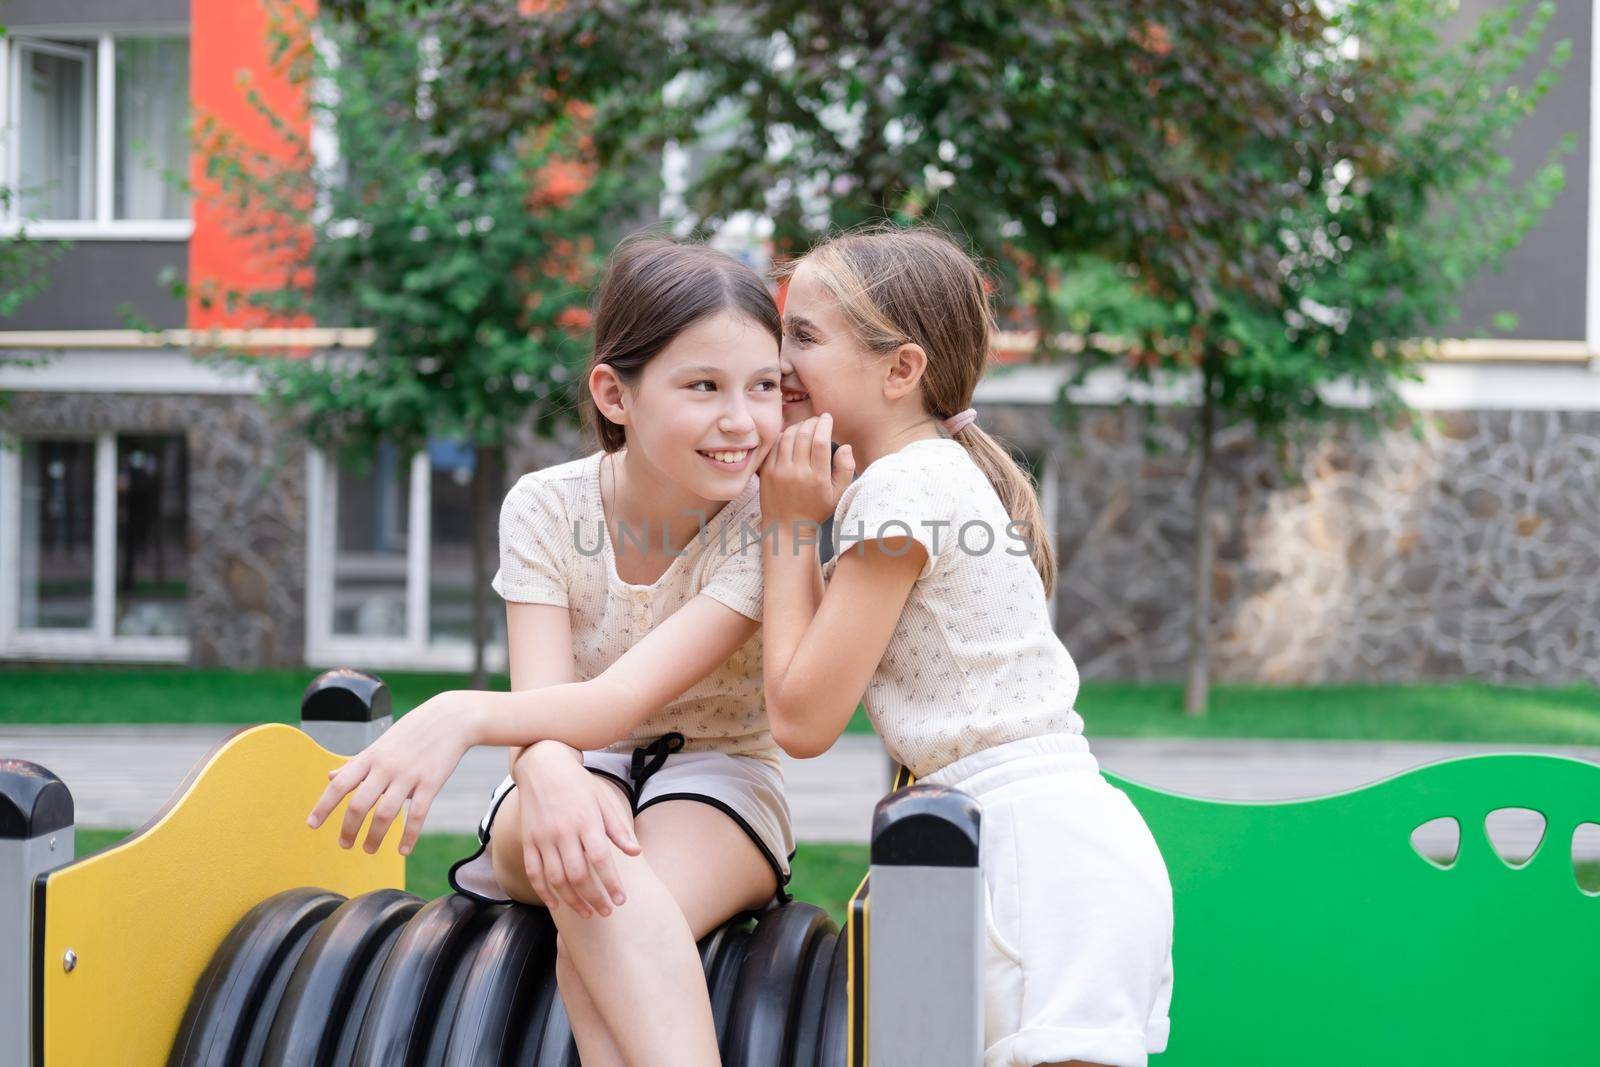 kids outdoors having fun on modern playground with new colorful equipment. sisterhood, friendship. two charming girls playing outdoors. sister, bffs, friends.